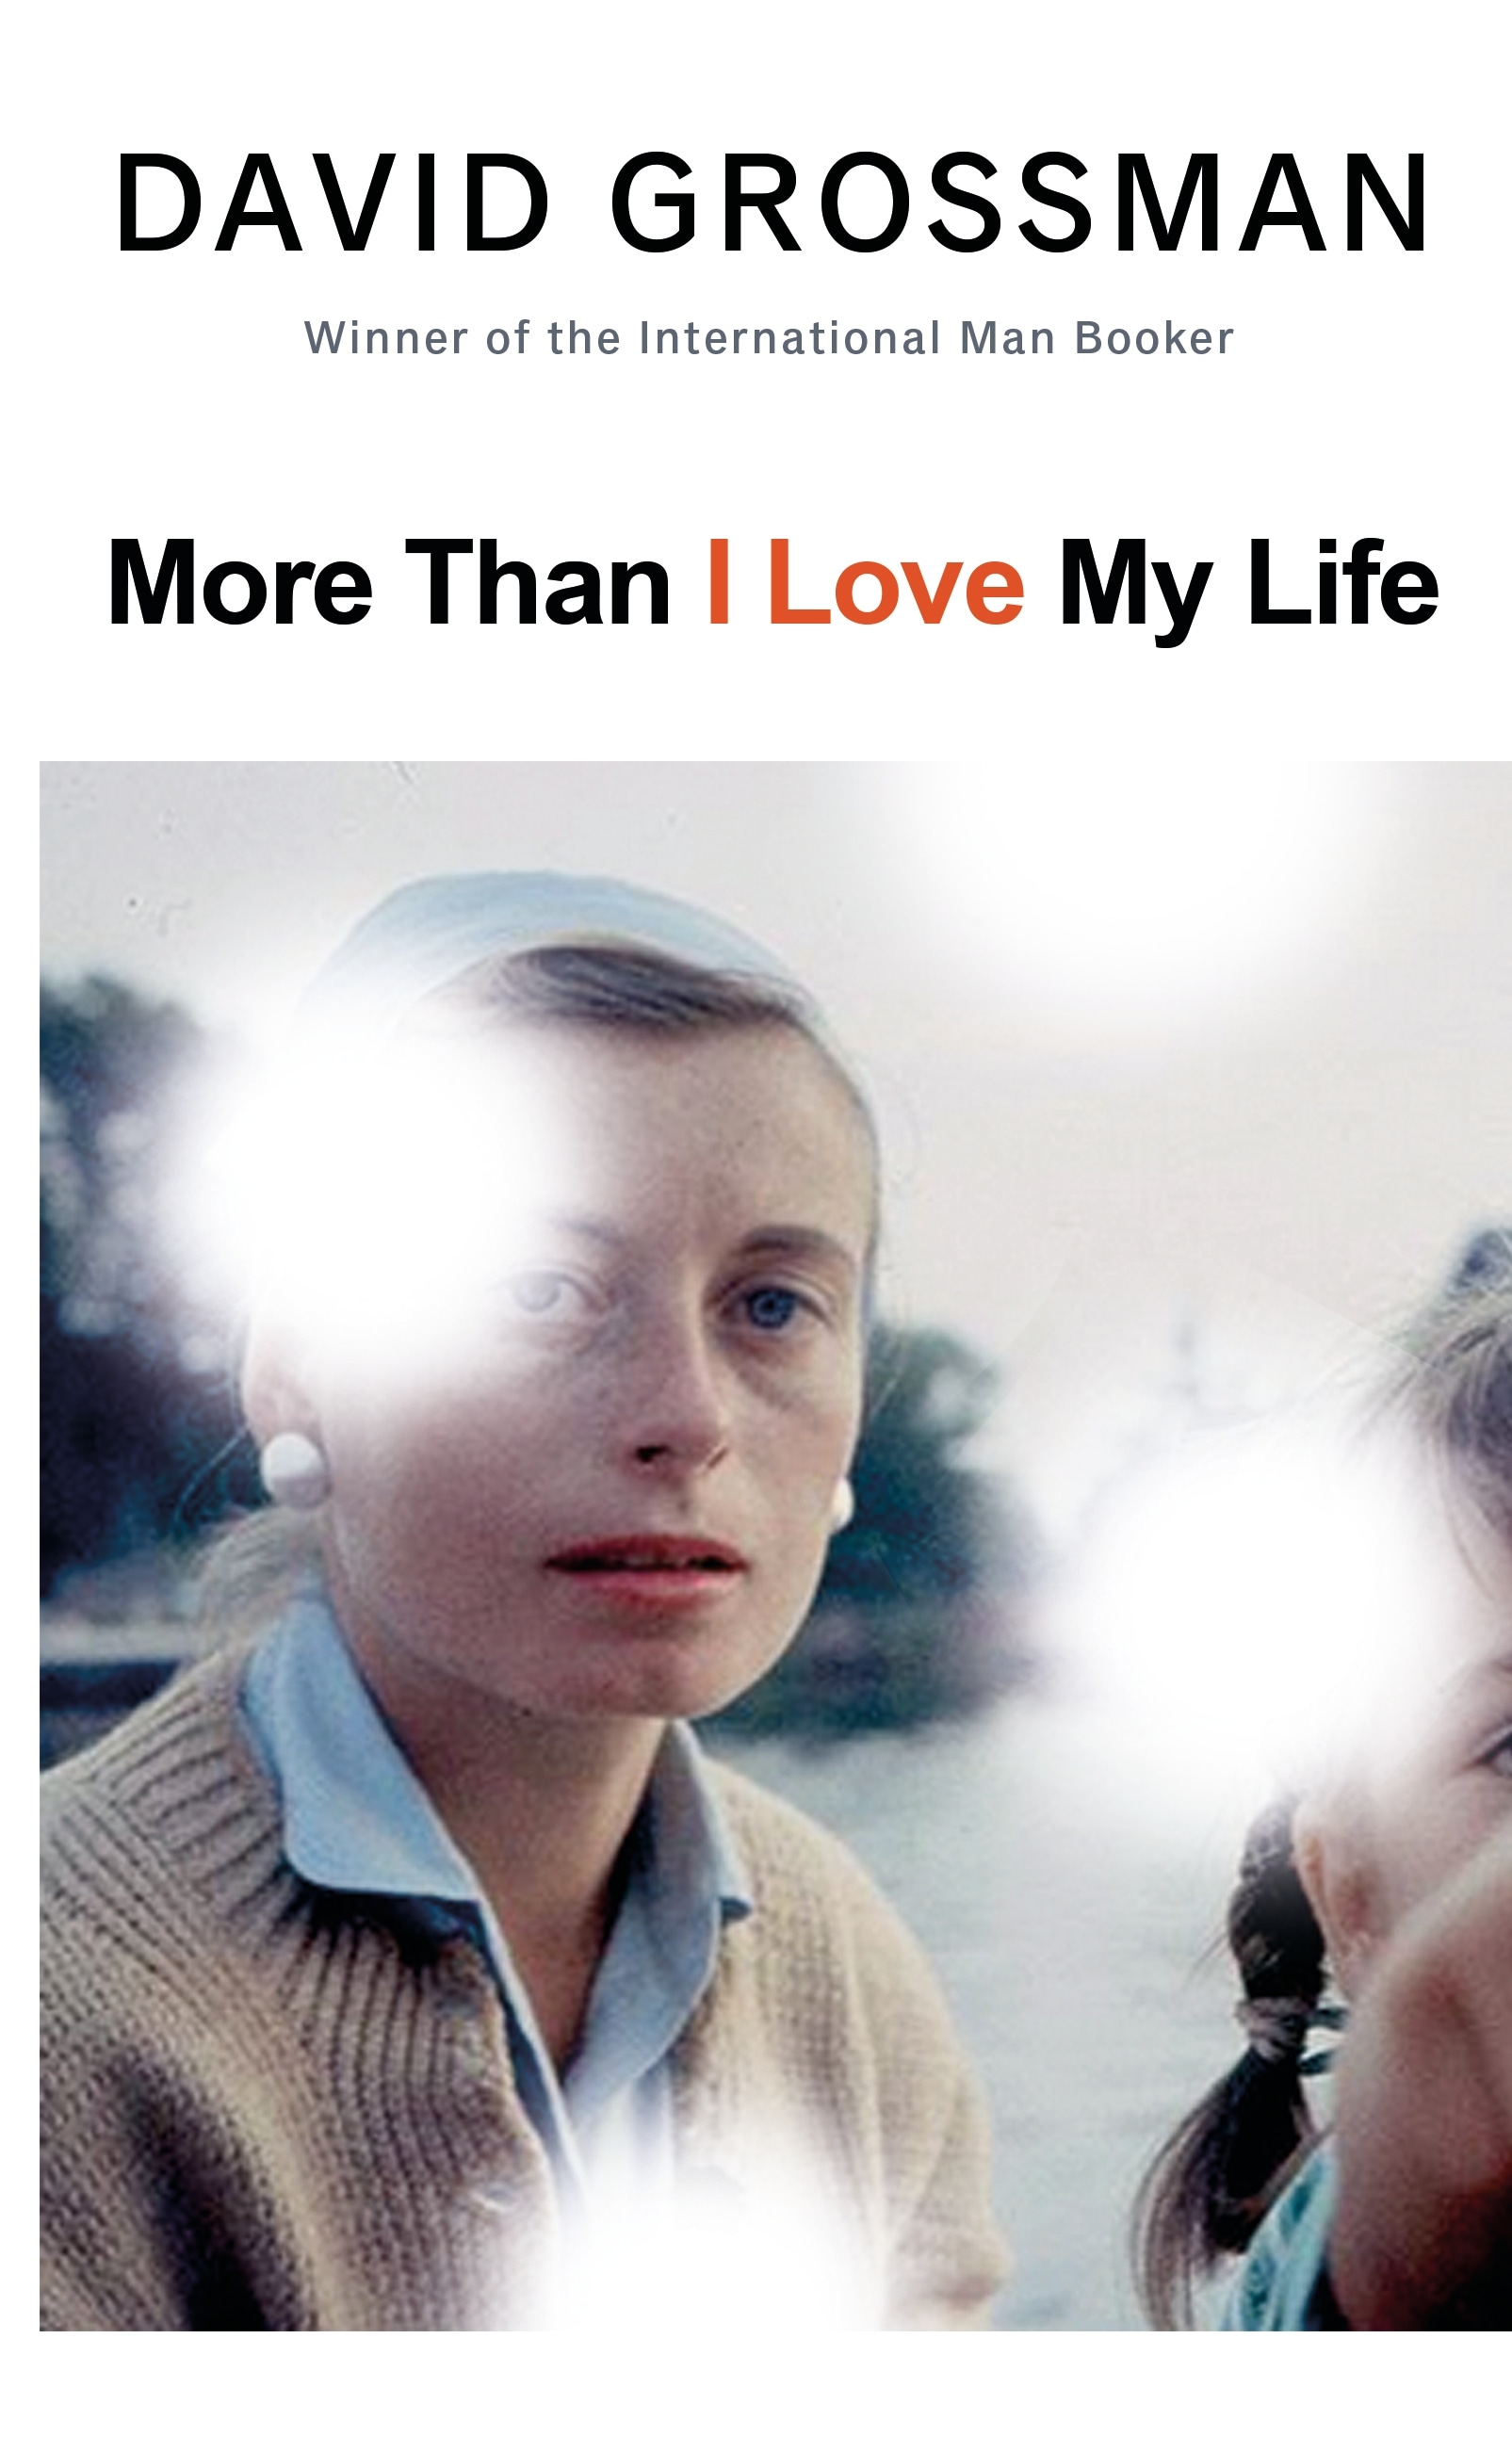 Book “More Than I Love My Life” by David Grossman — August 26, 2021